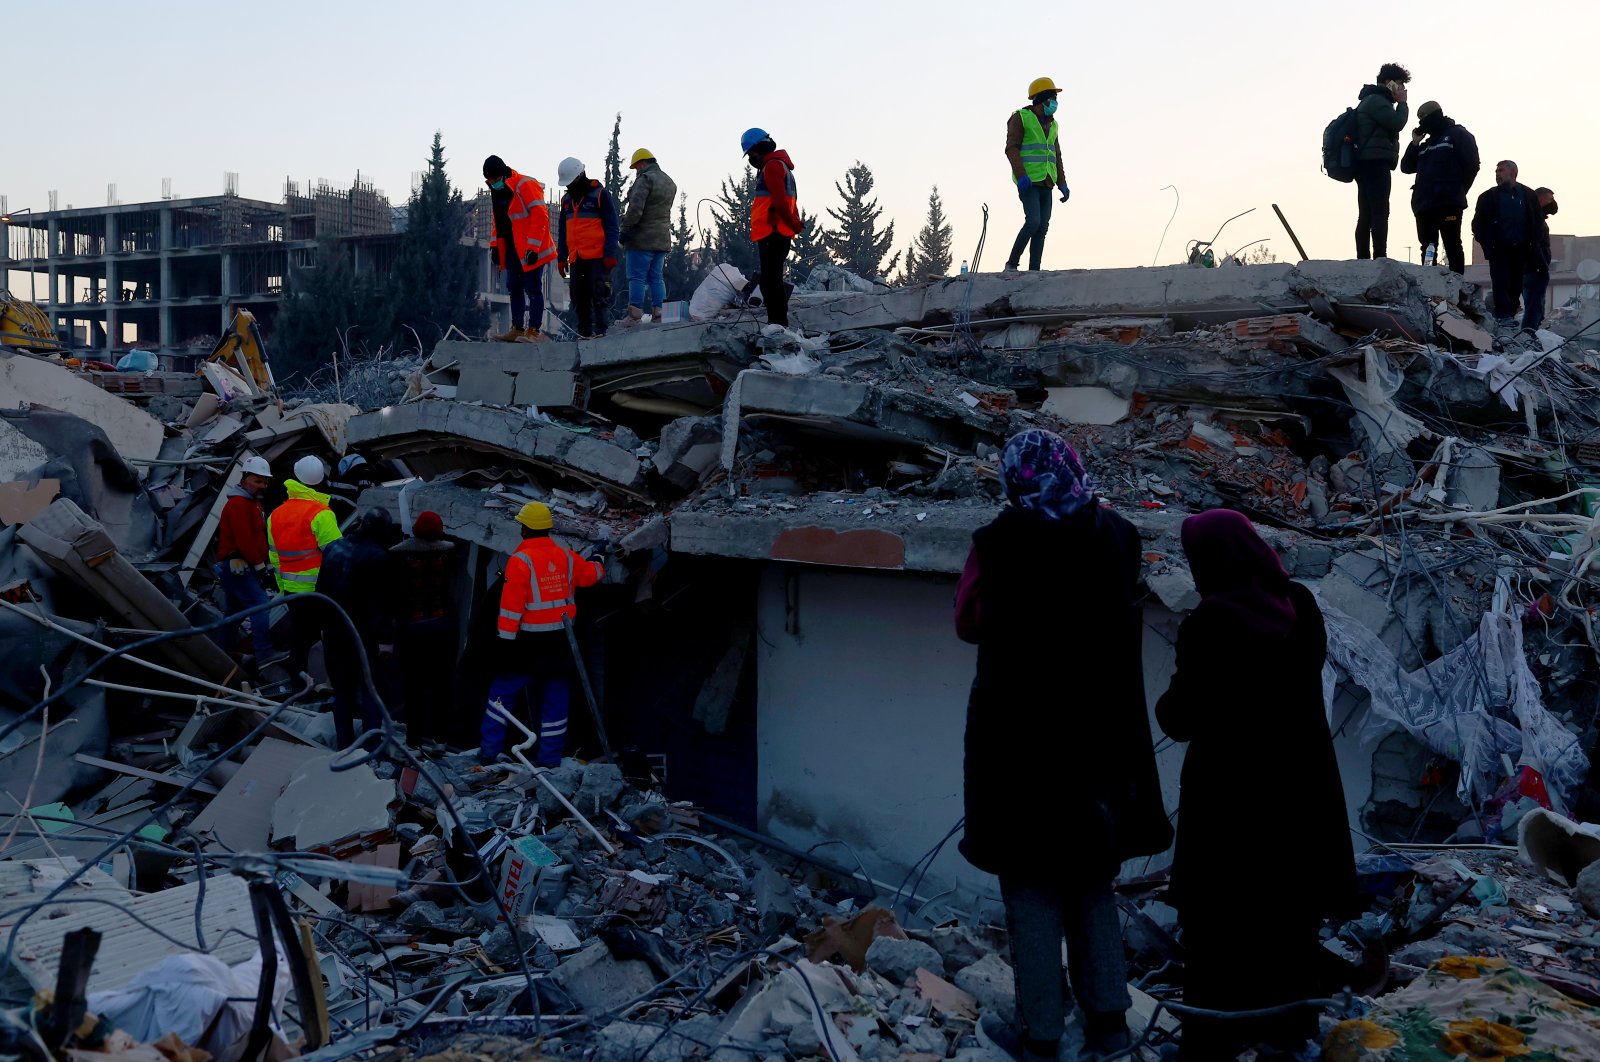 Emergency personnel and local people work at the site of collapsed buildings following a powerful earthquake in Adıyaman, southeastern Türkiye, Feb. 12, 2023. (EPA Photo)